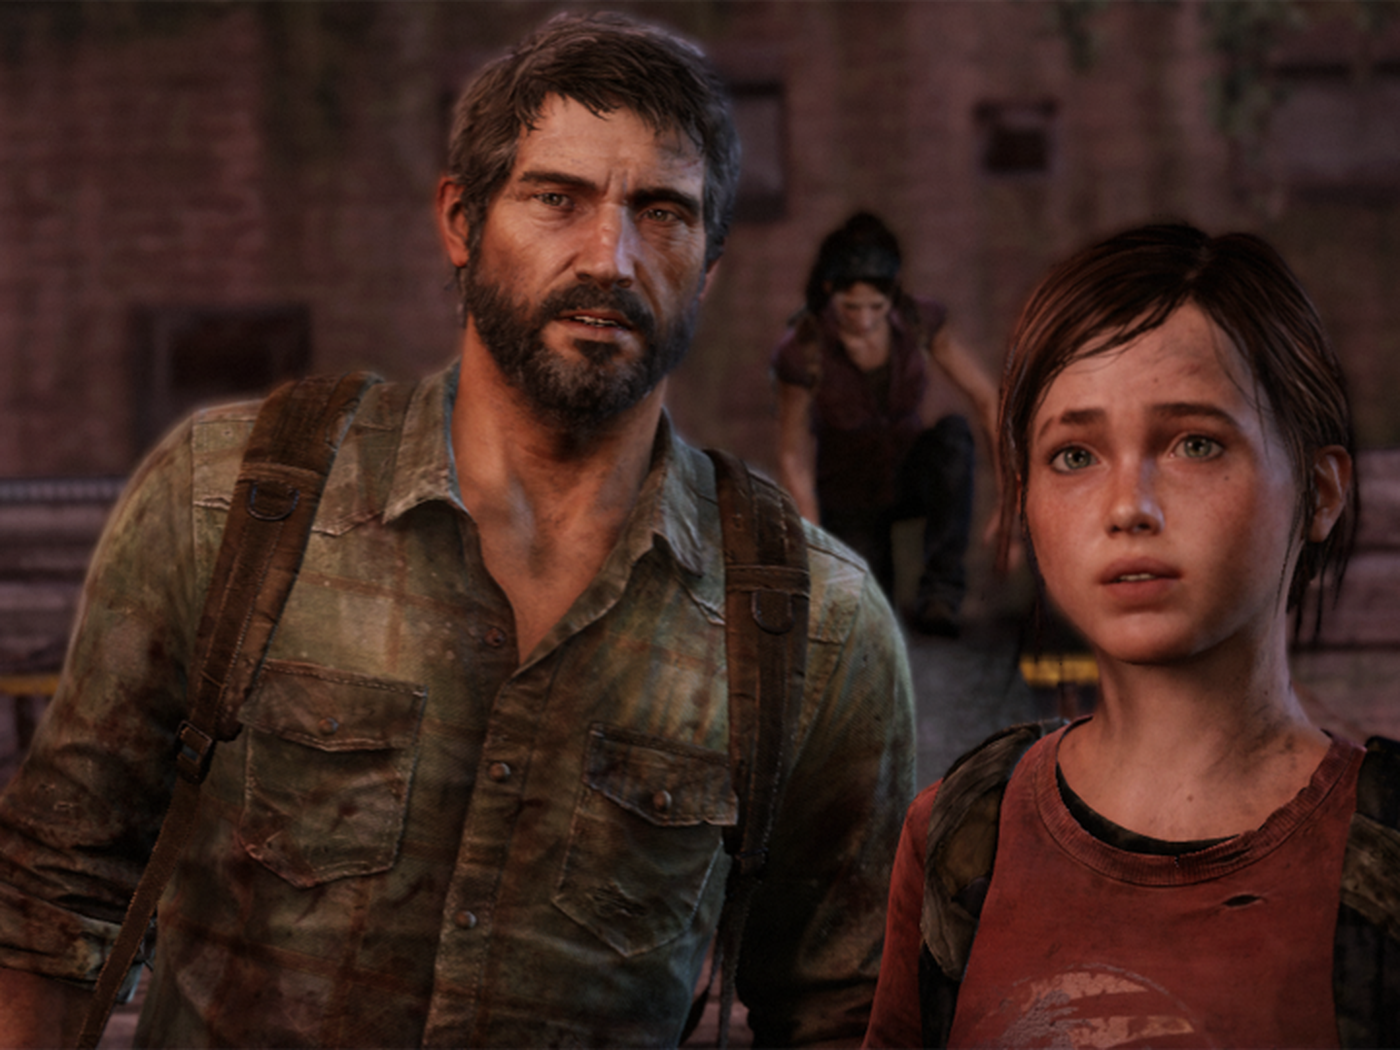 Sony is reportedly remaking The Last of Us for PS5 as it chases big hits